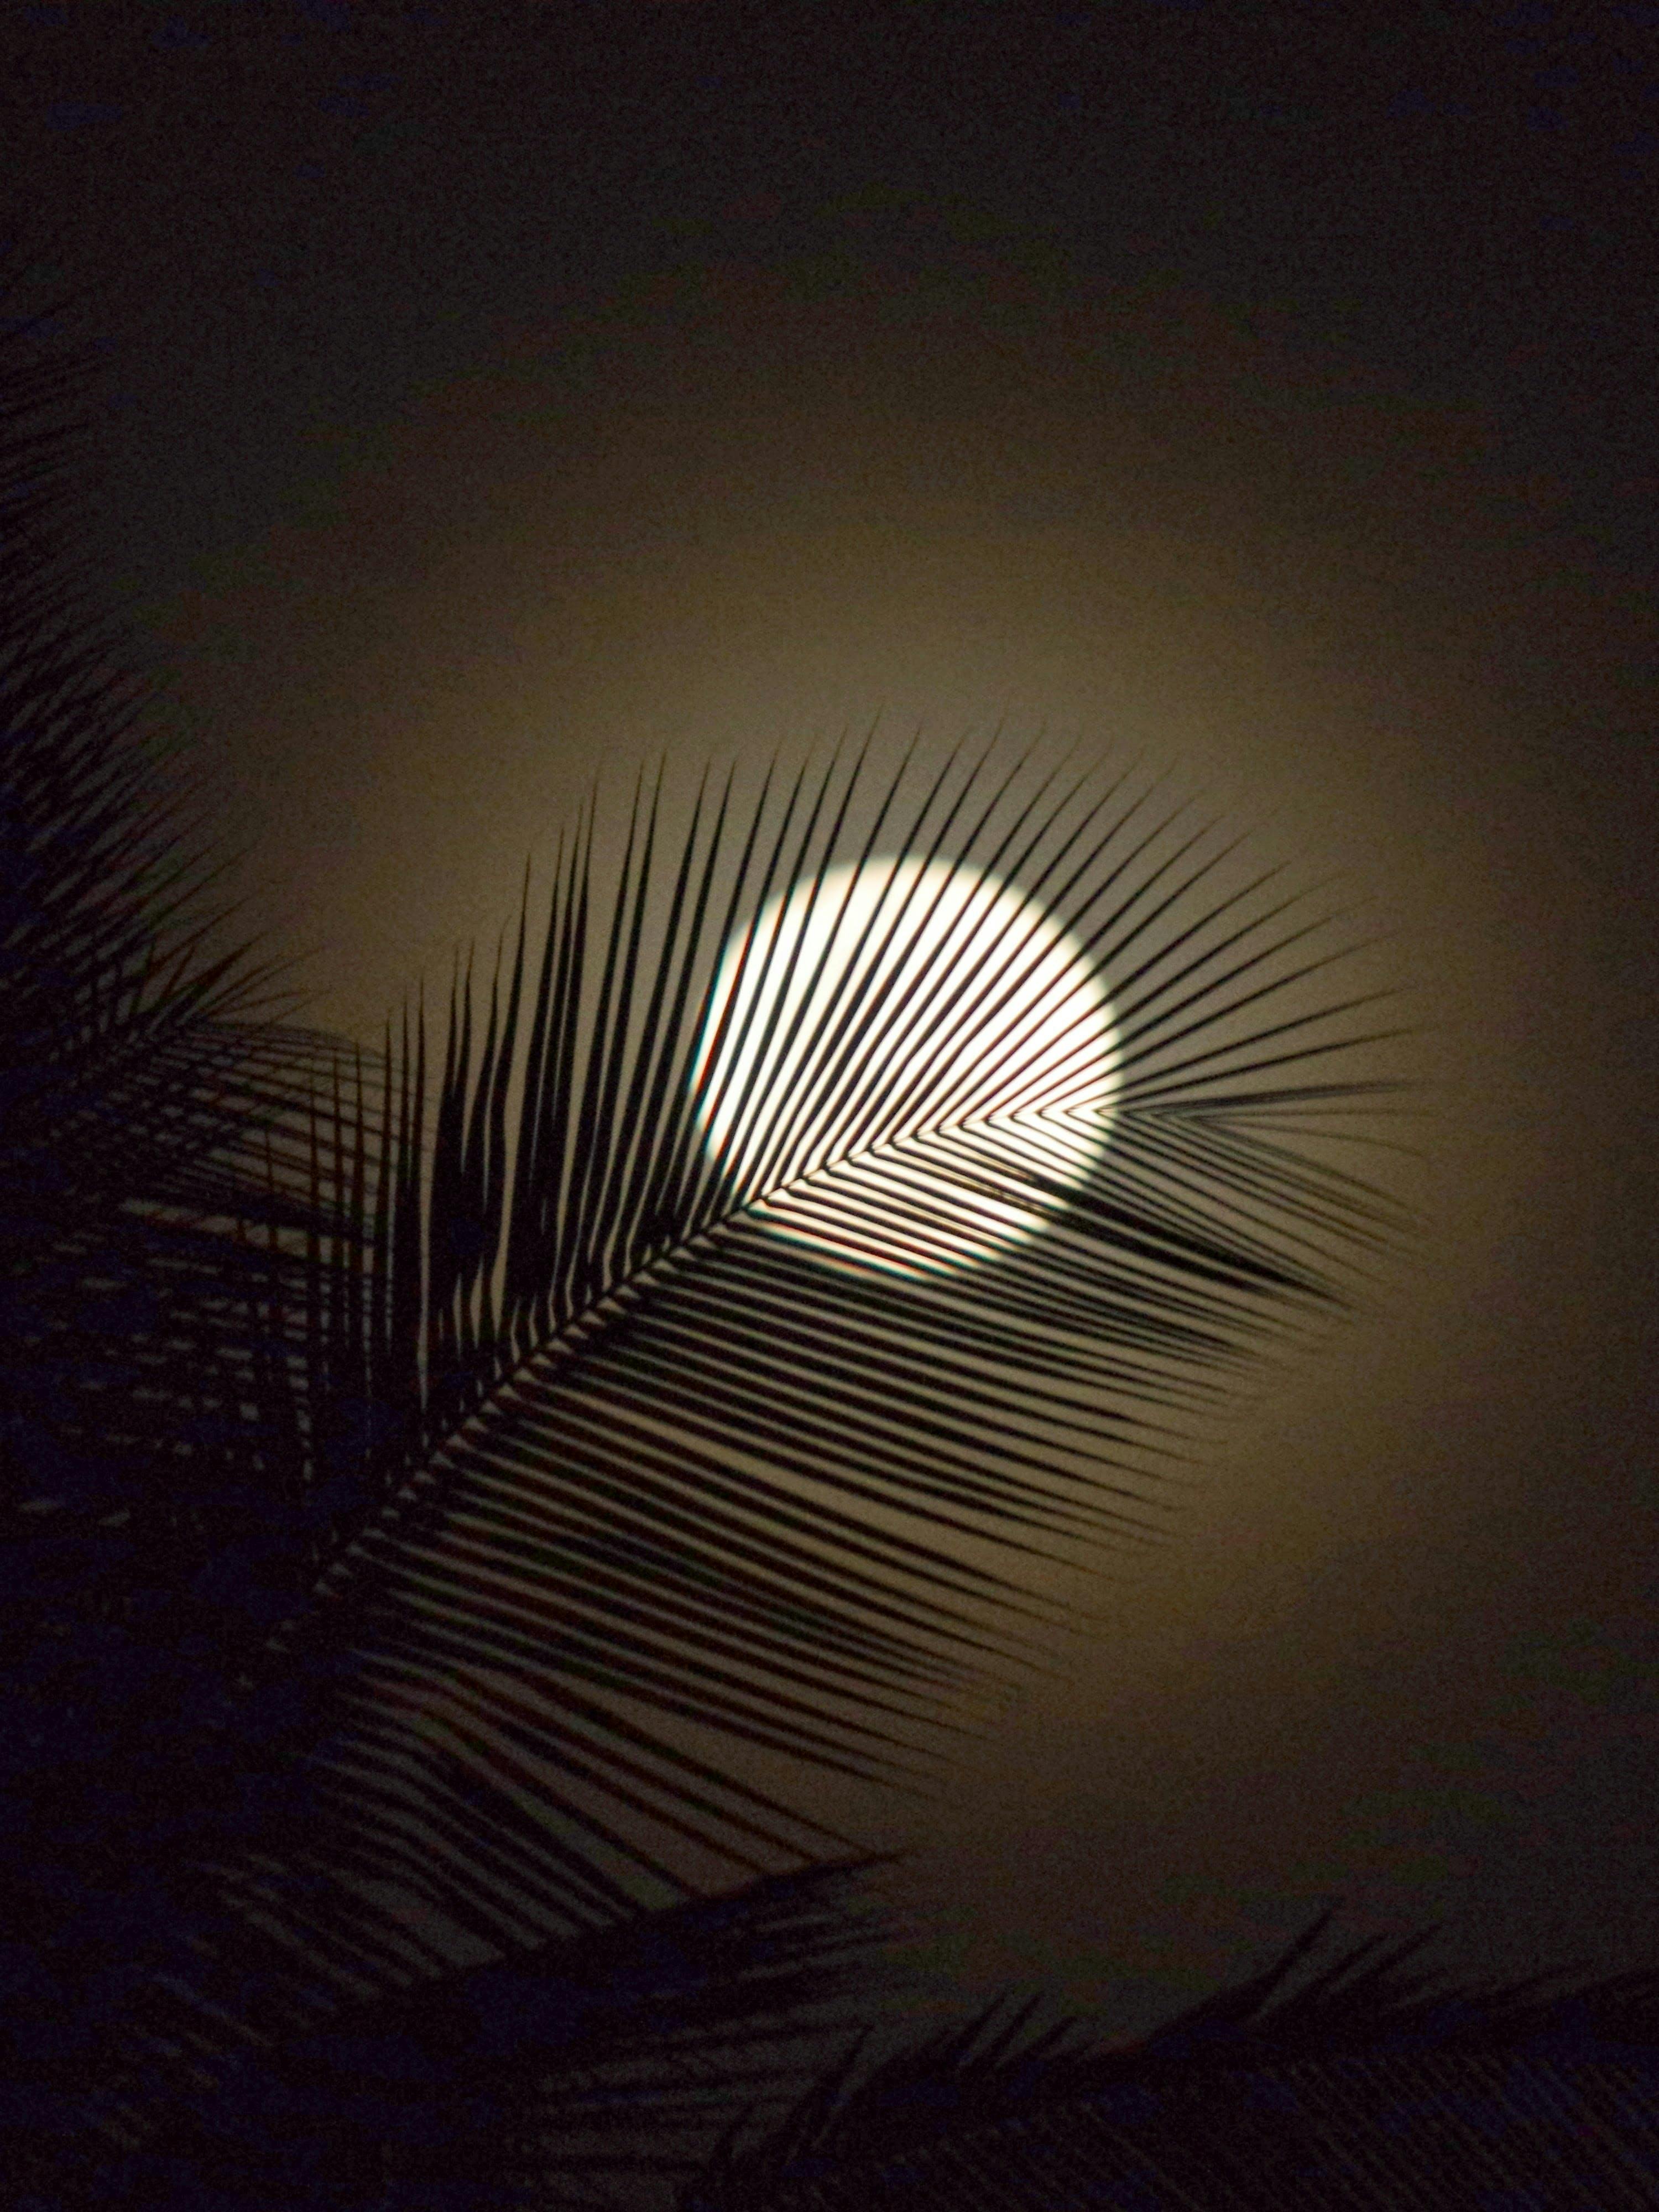 Picture of the full moon behind a tree at night.